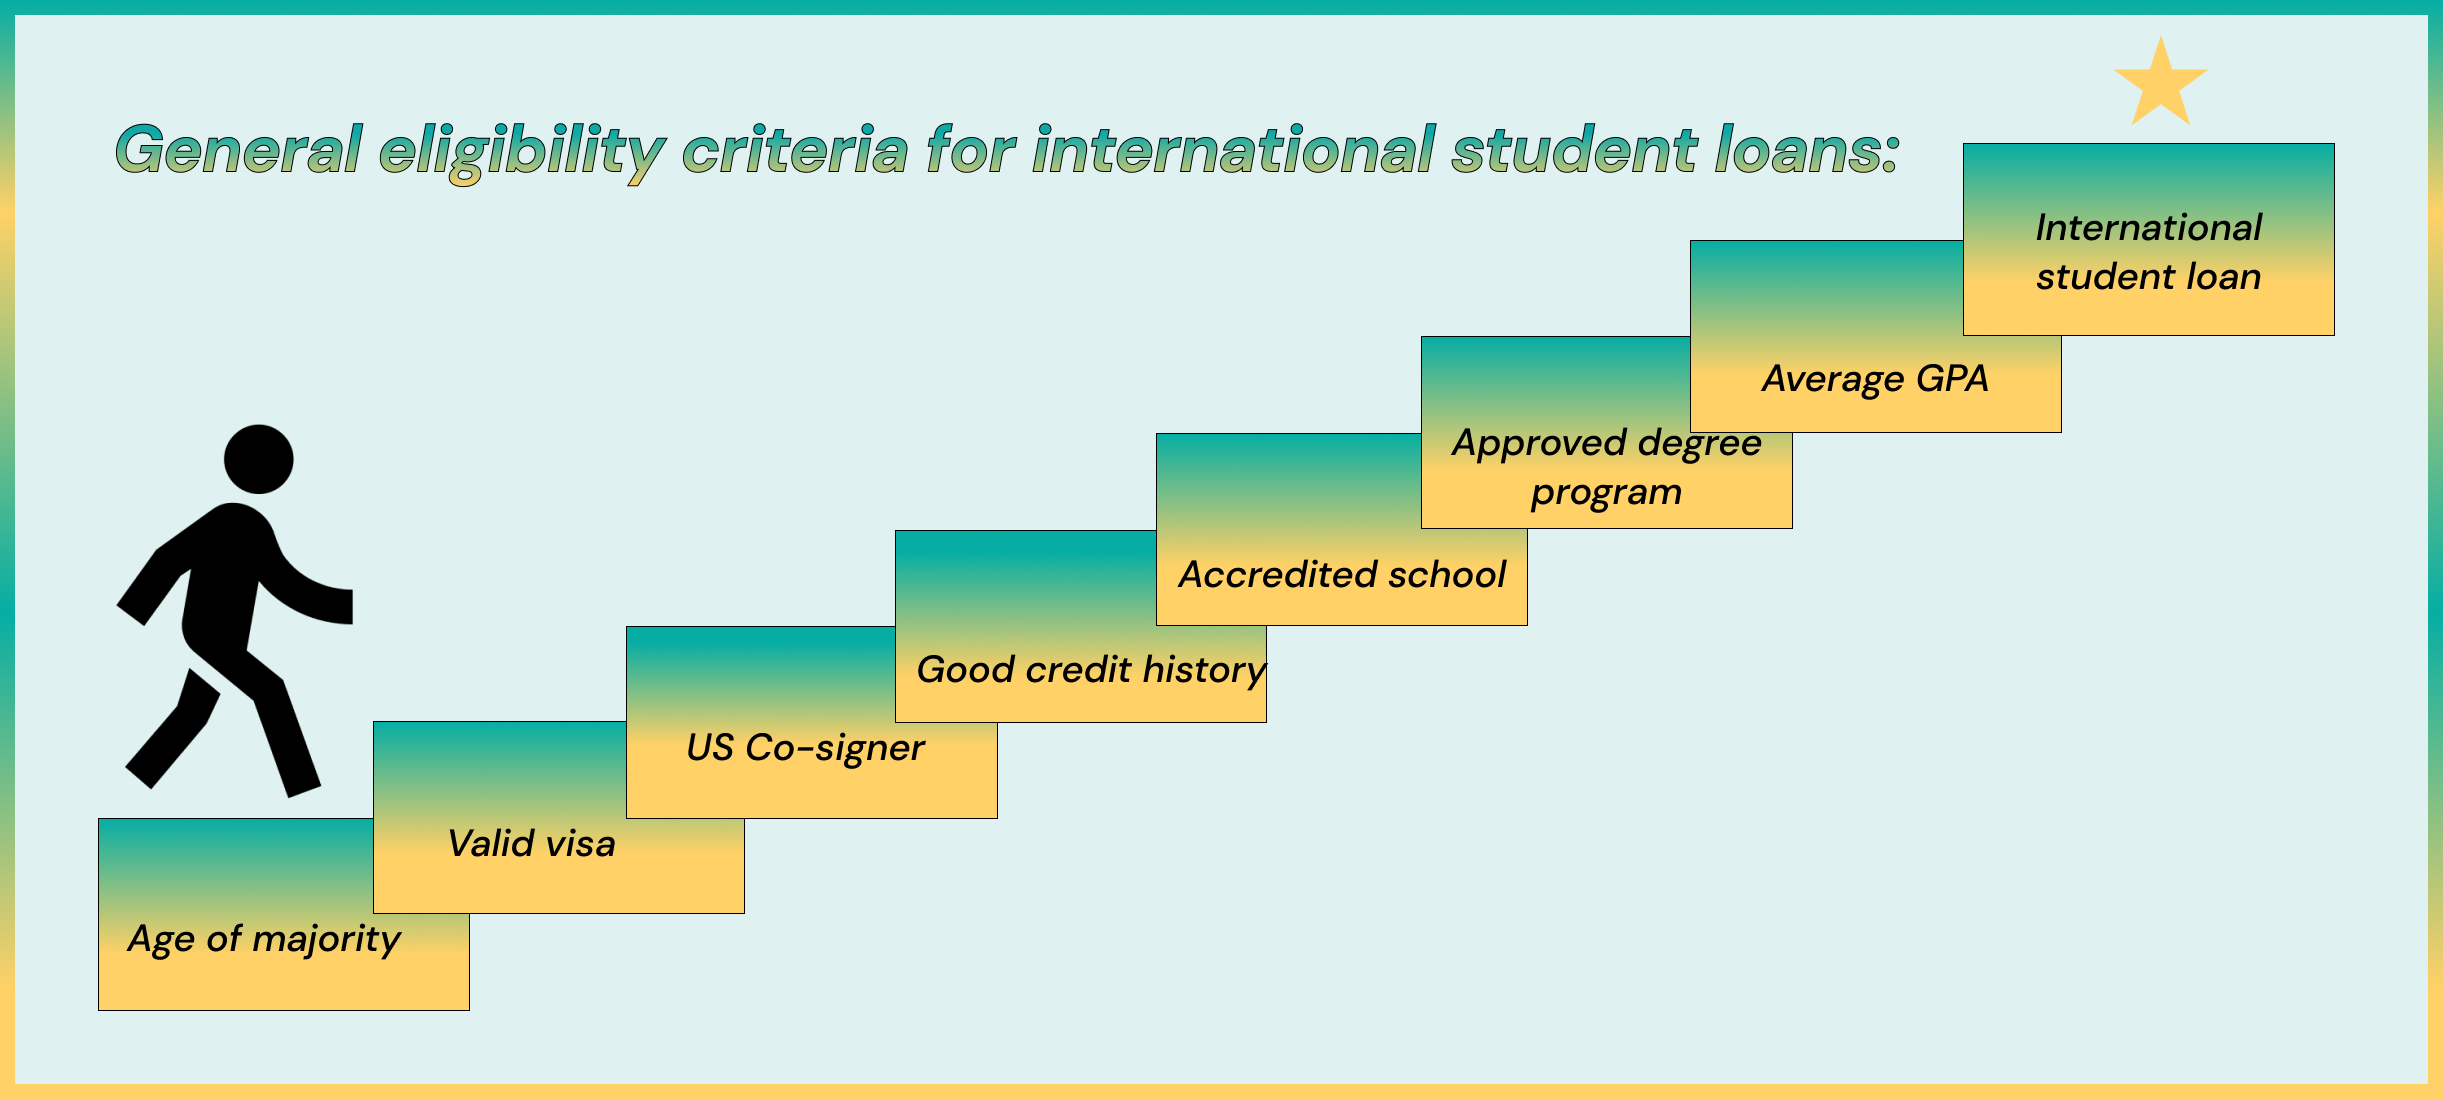 General eligibility criteria for international student loans